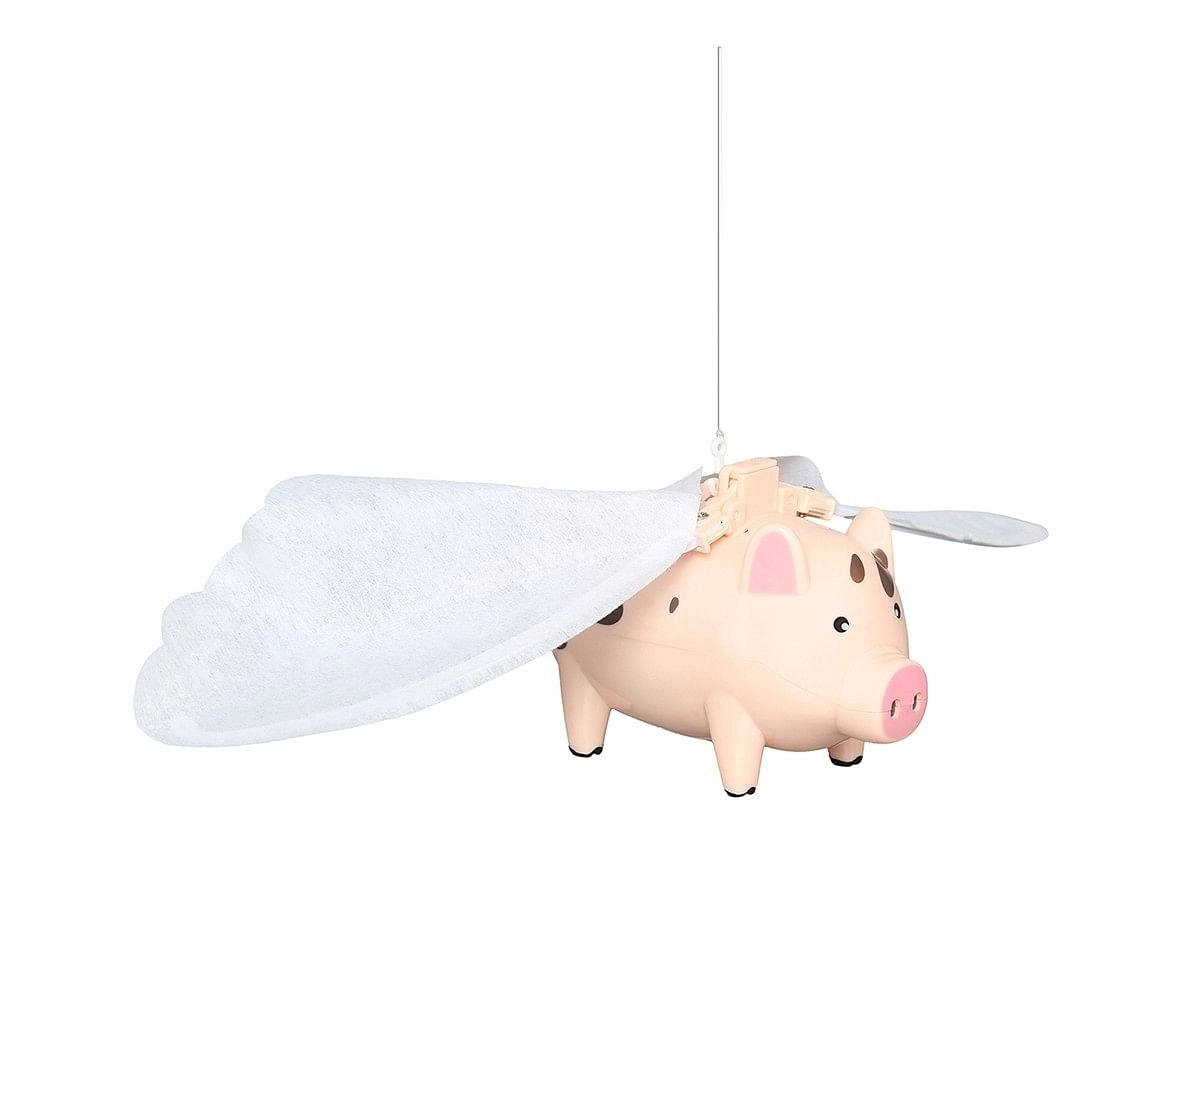 Hamleys Flying Pig Toy (Pink) Impulse Toys for Kids age 24M+ (Peach)